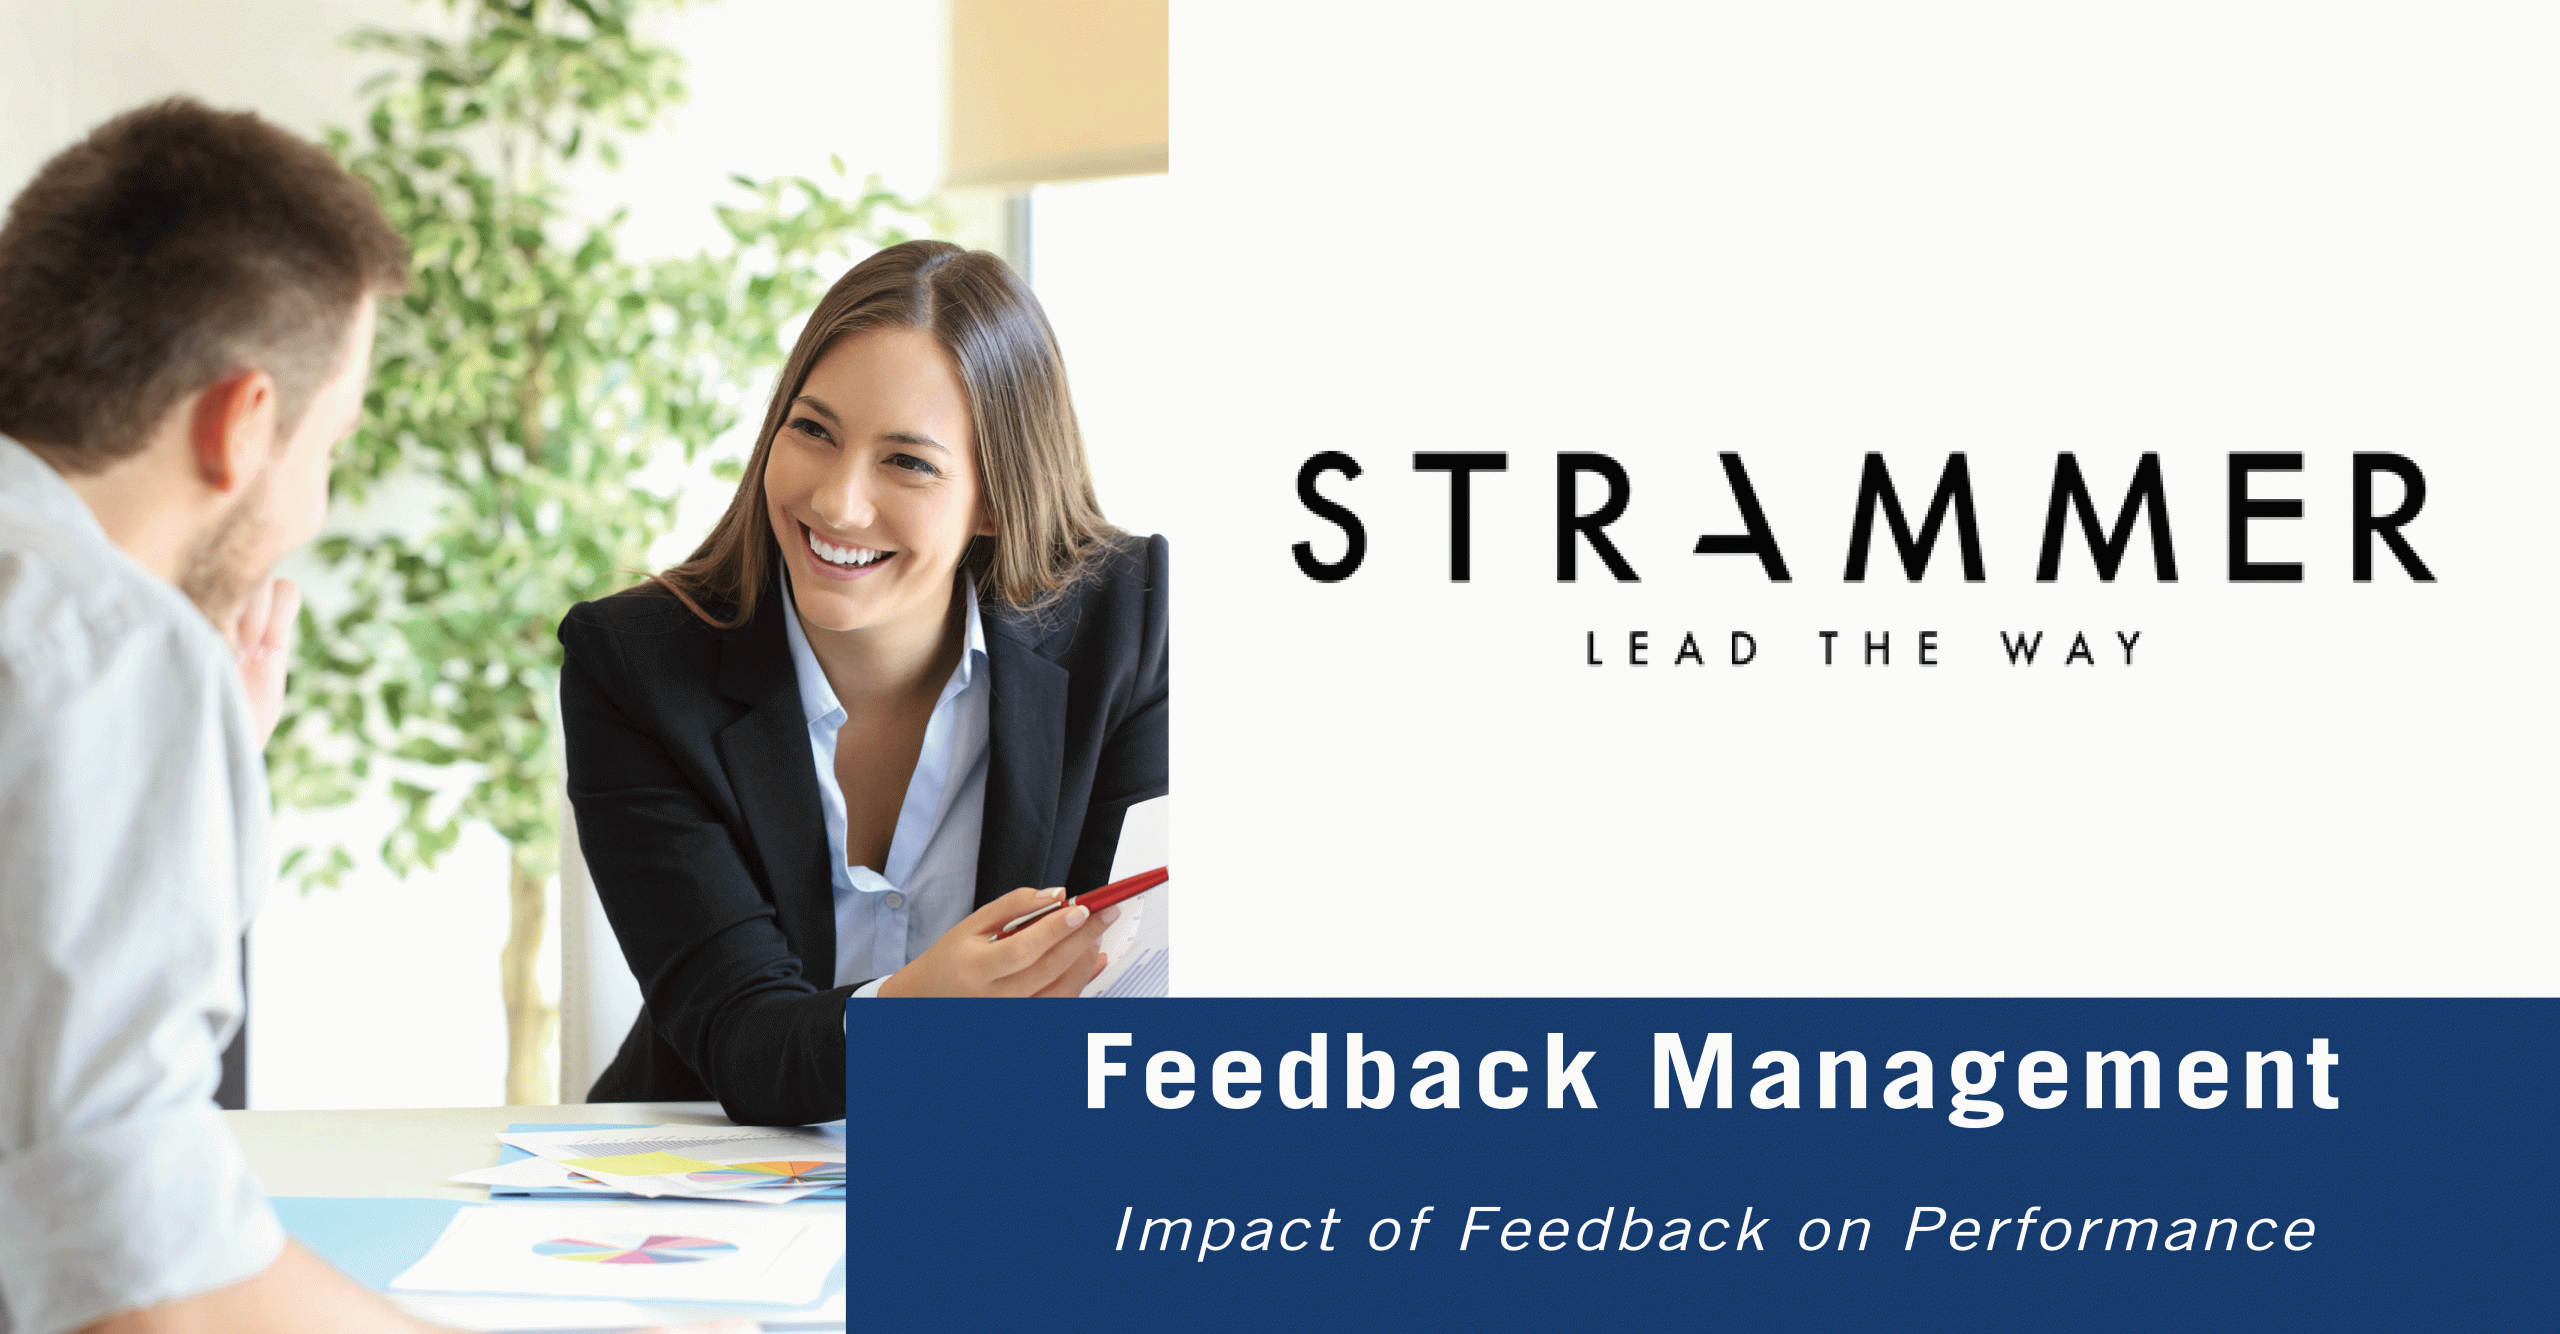 How Quality Feedback Can Improve Performance